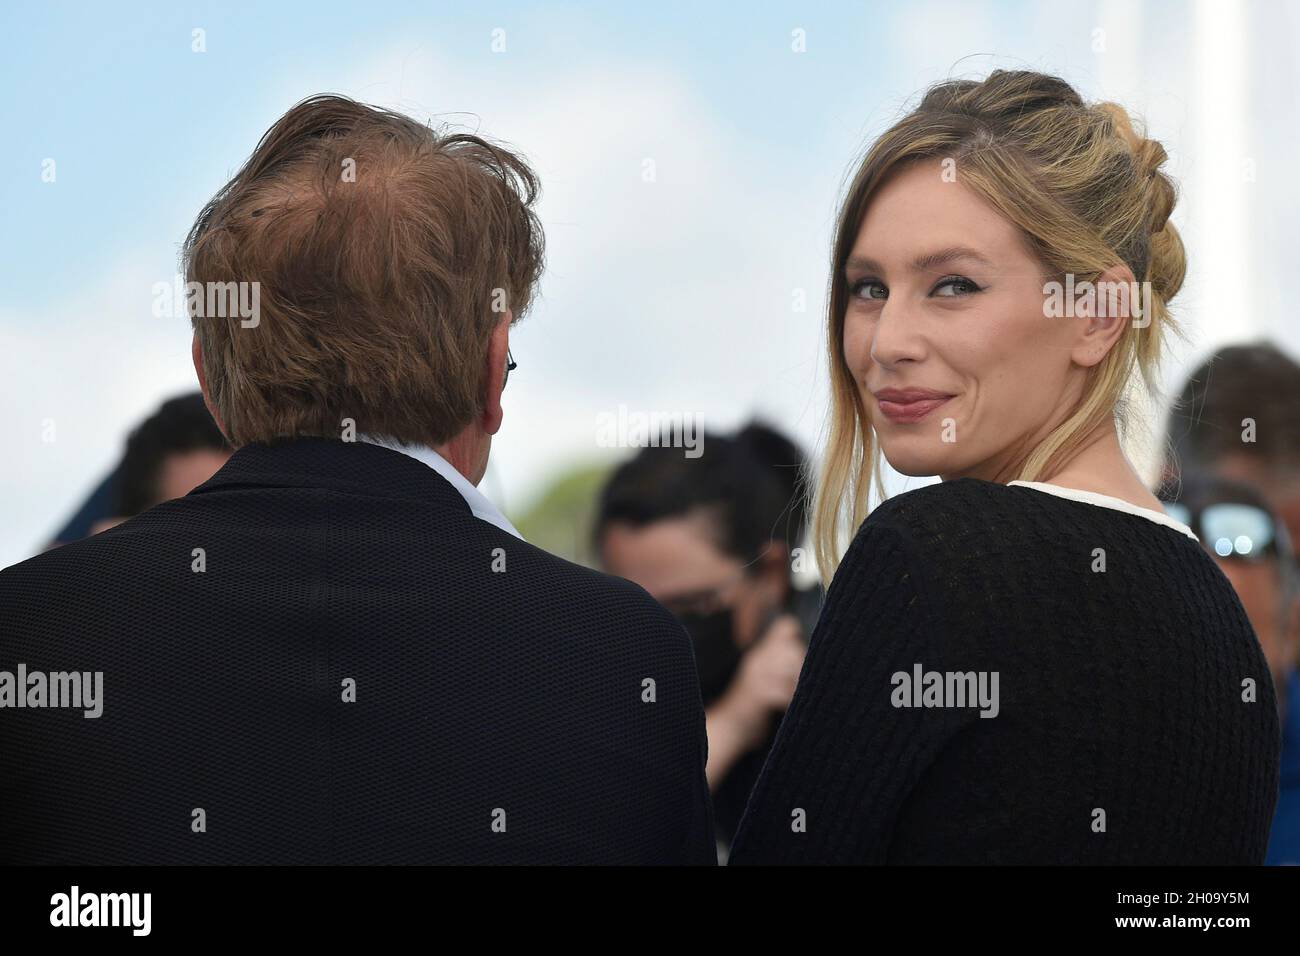 74th edition of the Cannes Film Festival: actress Dylan Penn and her father Sean Penn posing during a photocall for the film “Flag Day”, directed by S Stock Photo